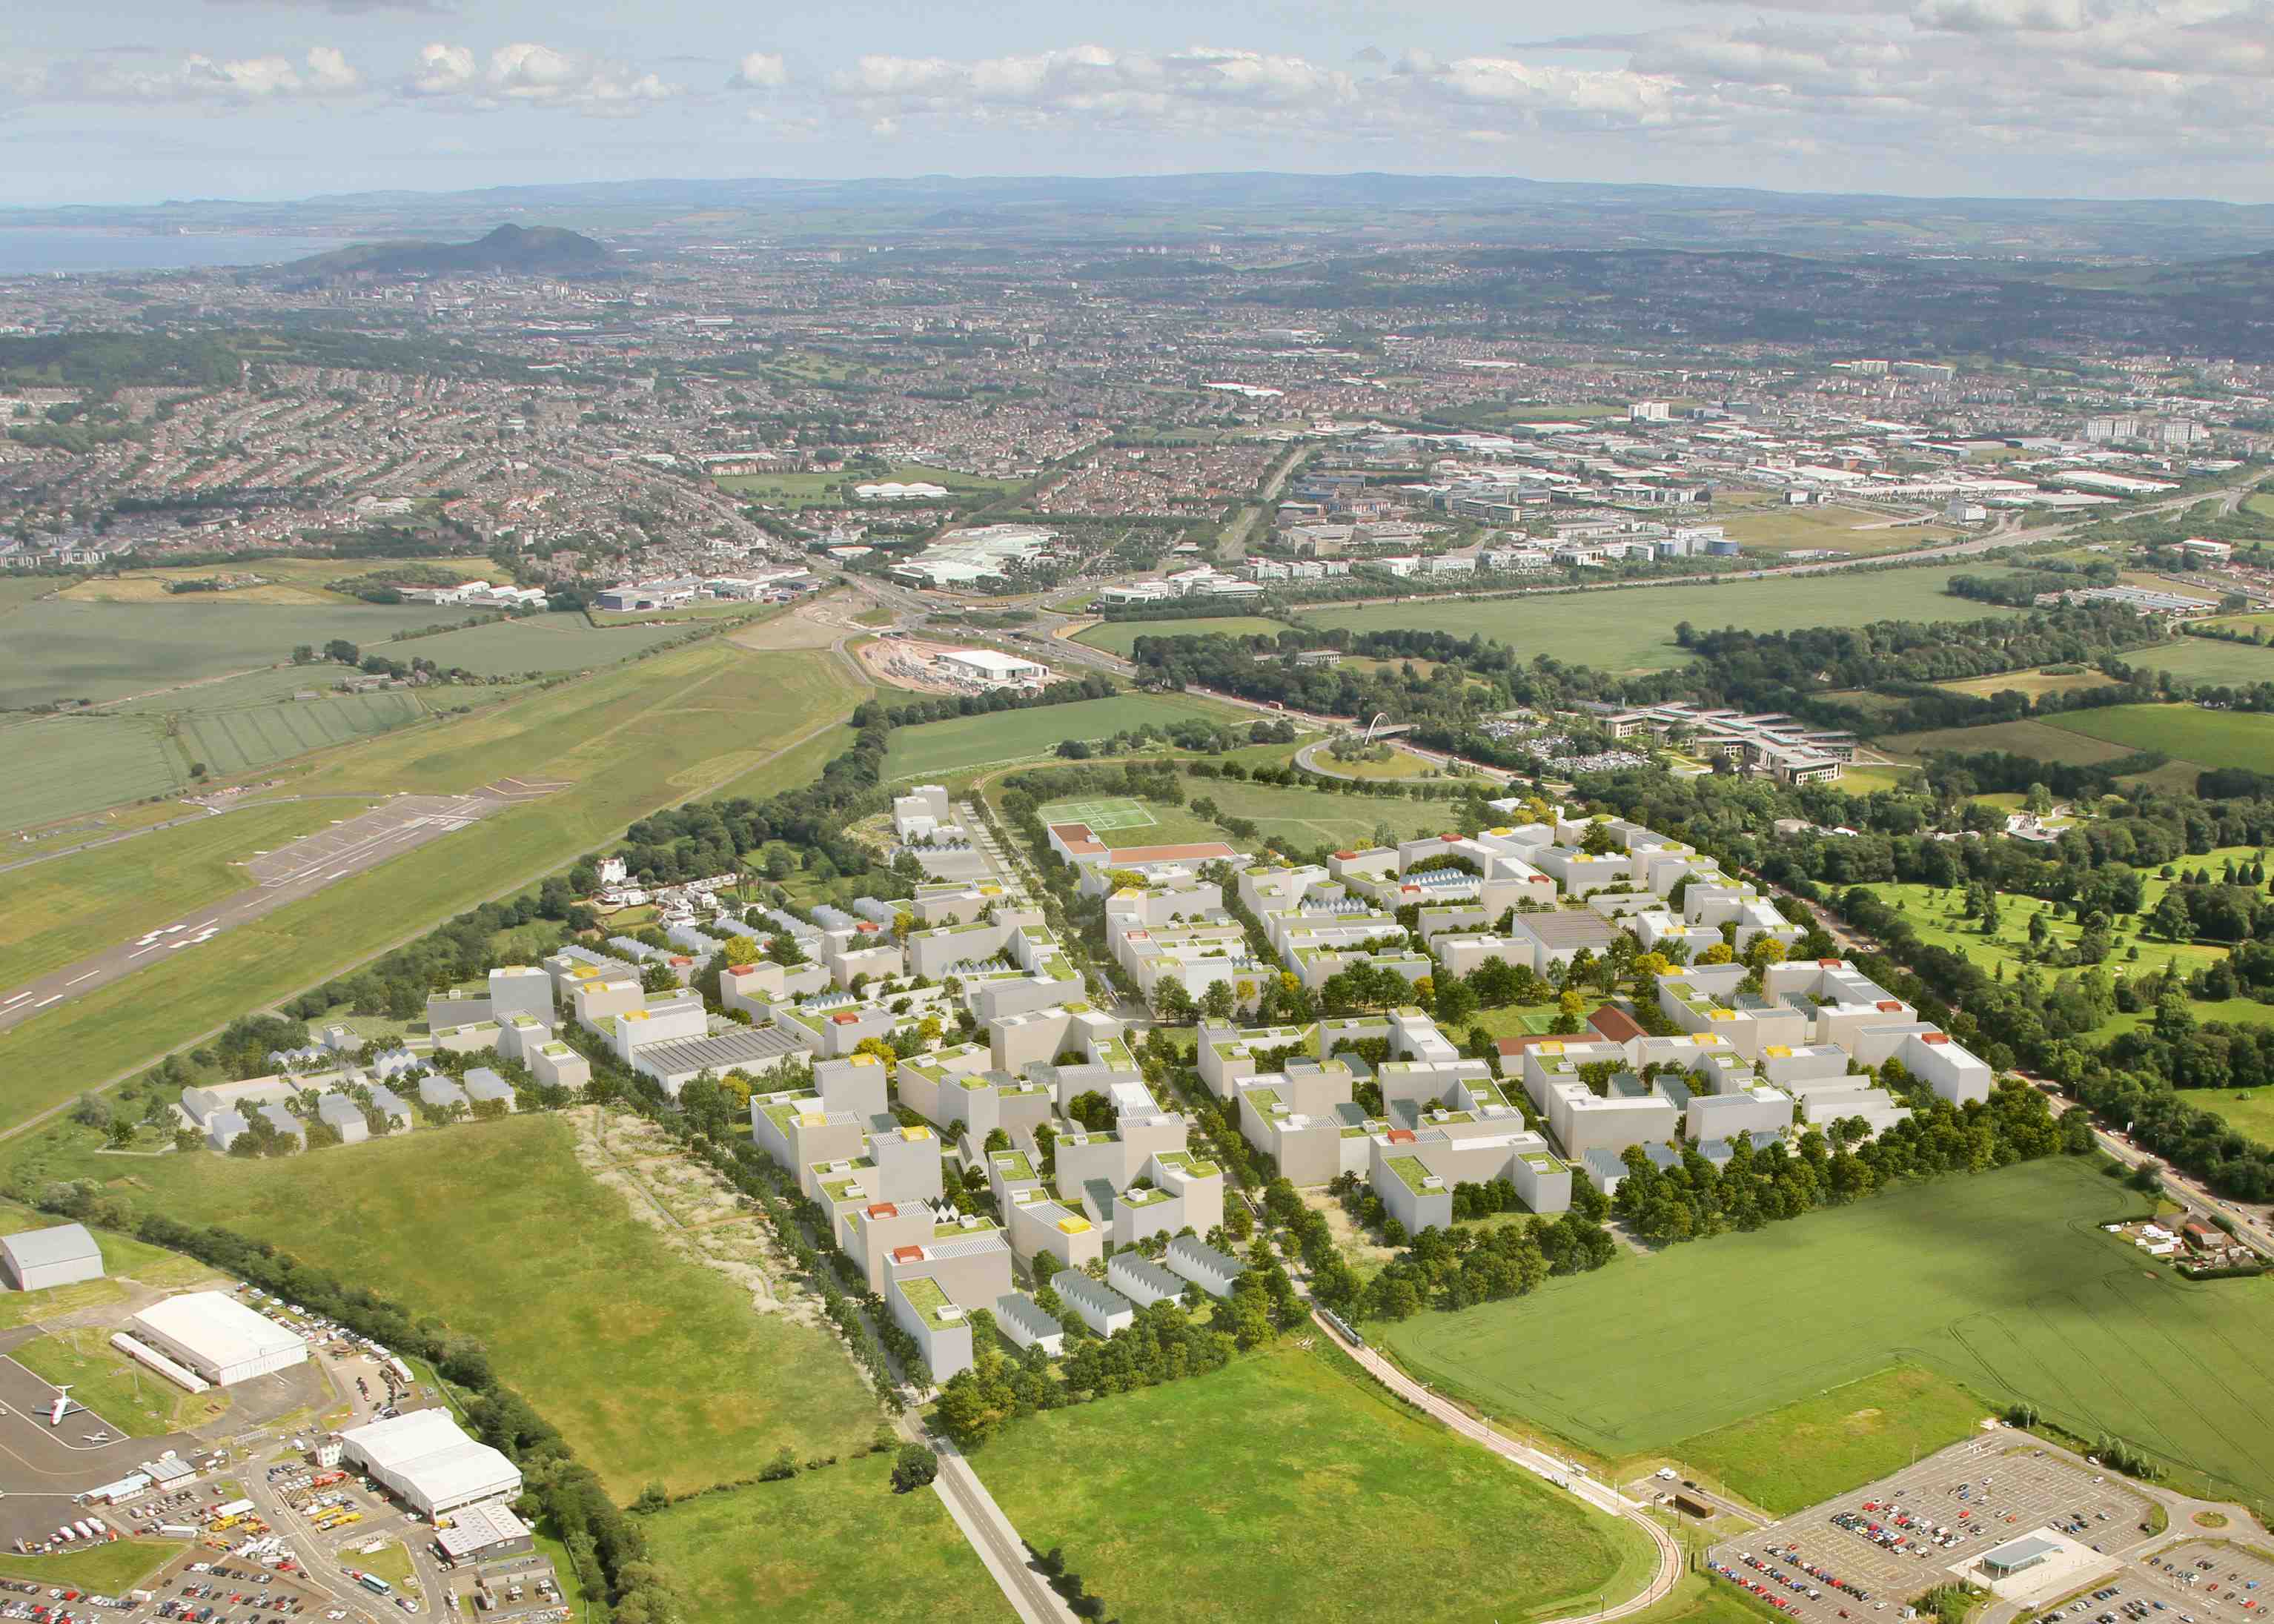 Homes-led ‘20-minute’ neighbourhood proposed for 205-acre West Edinburgh site